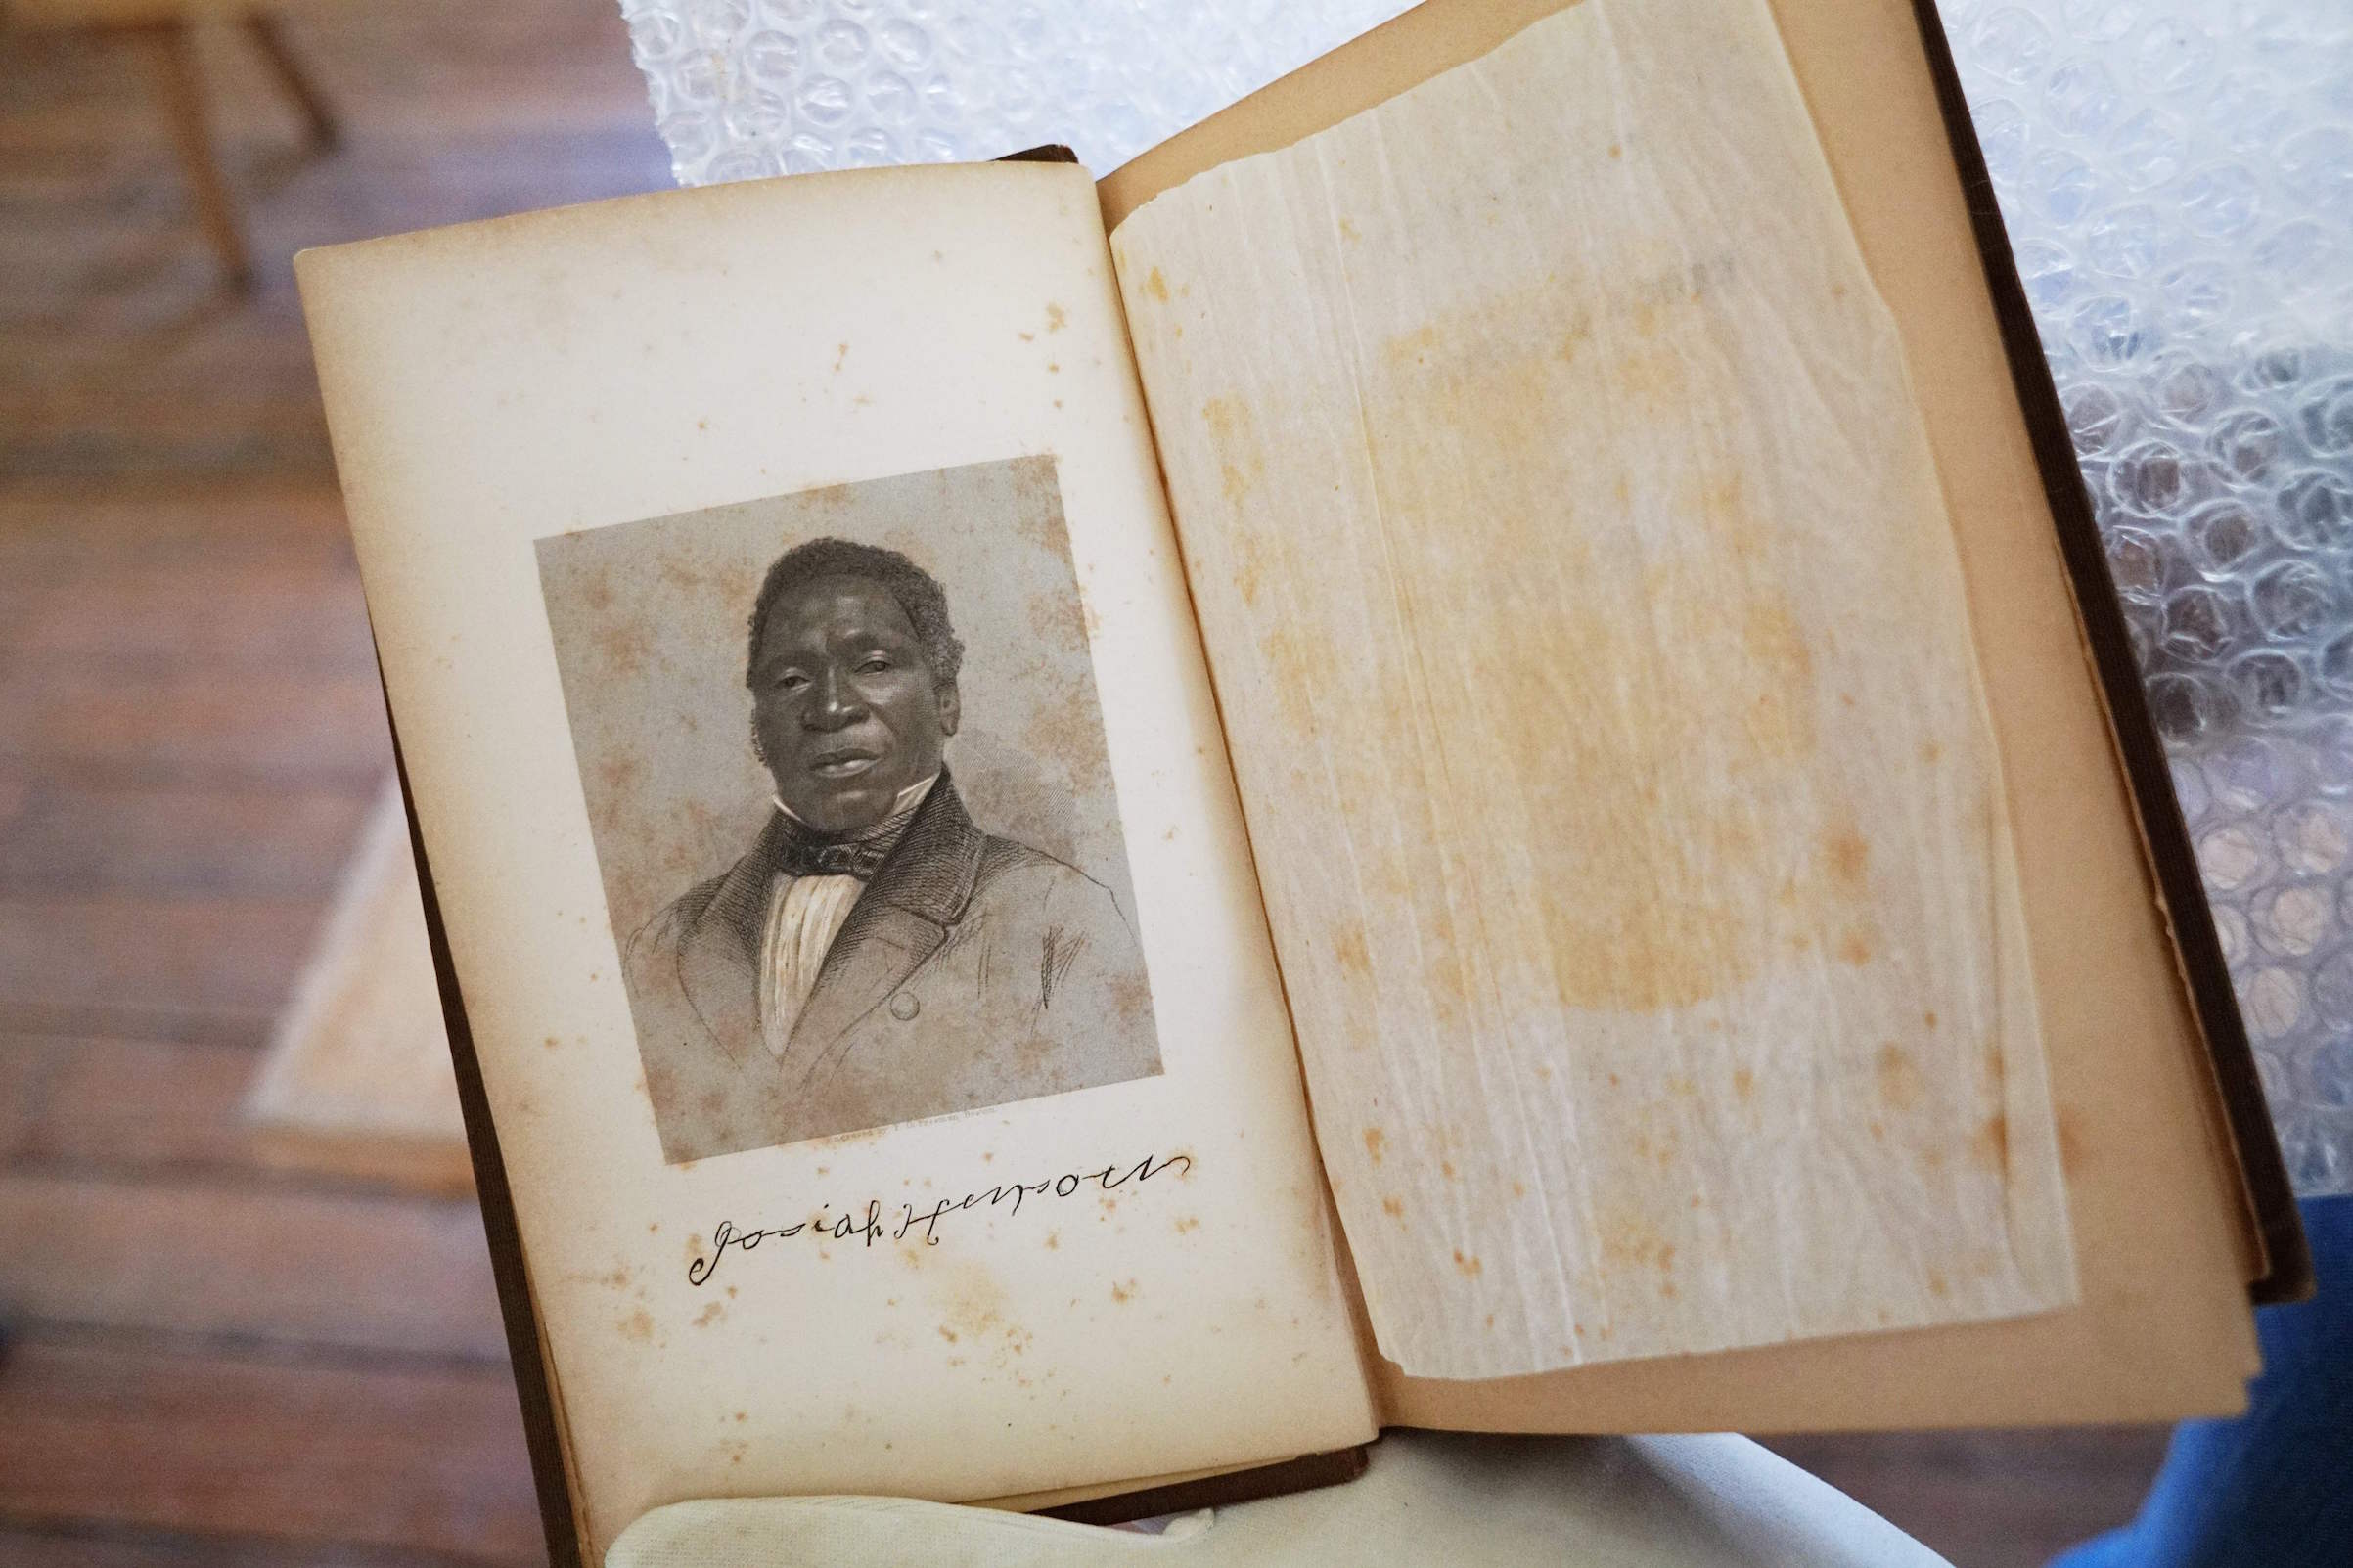 A photo taken on March 29, 2017 shows a portrait of Josiah Henson in a book he authored, at Josiah Henson Park in Bethesda, Md.
                      His life may have inspired the landmark novel "Uncle Tom's Cabin" but 150 years after the abolition of slavery in the US, Josiah Henson remains a controversial figure. (Mandel Ngan—AFP/Getty Images)